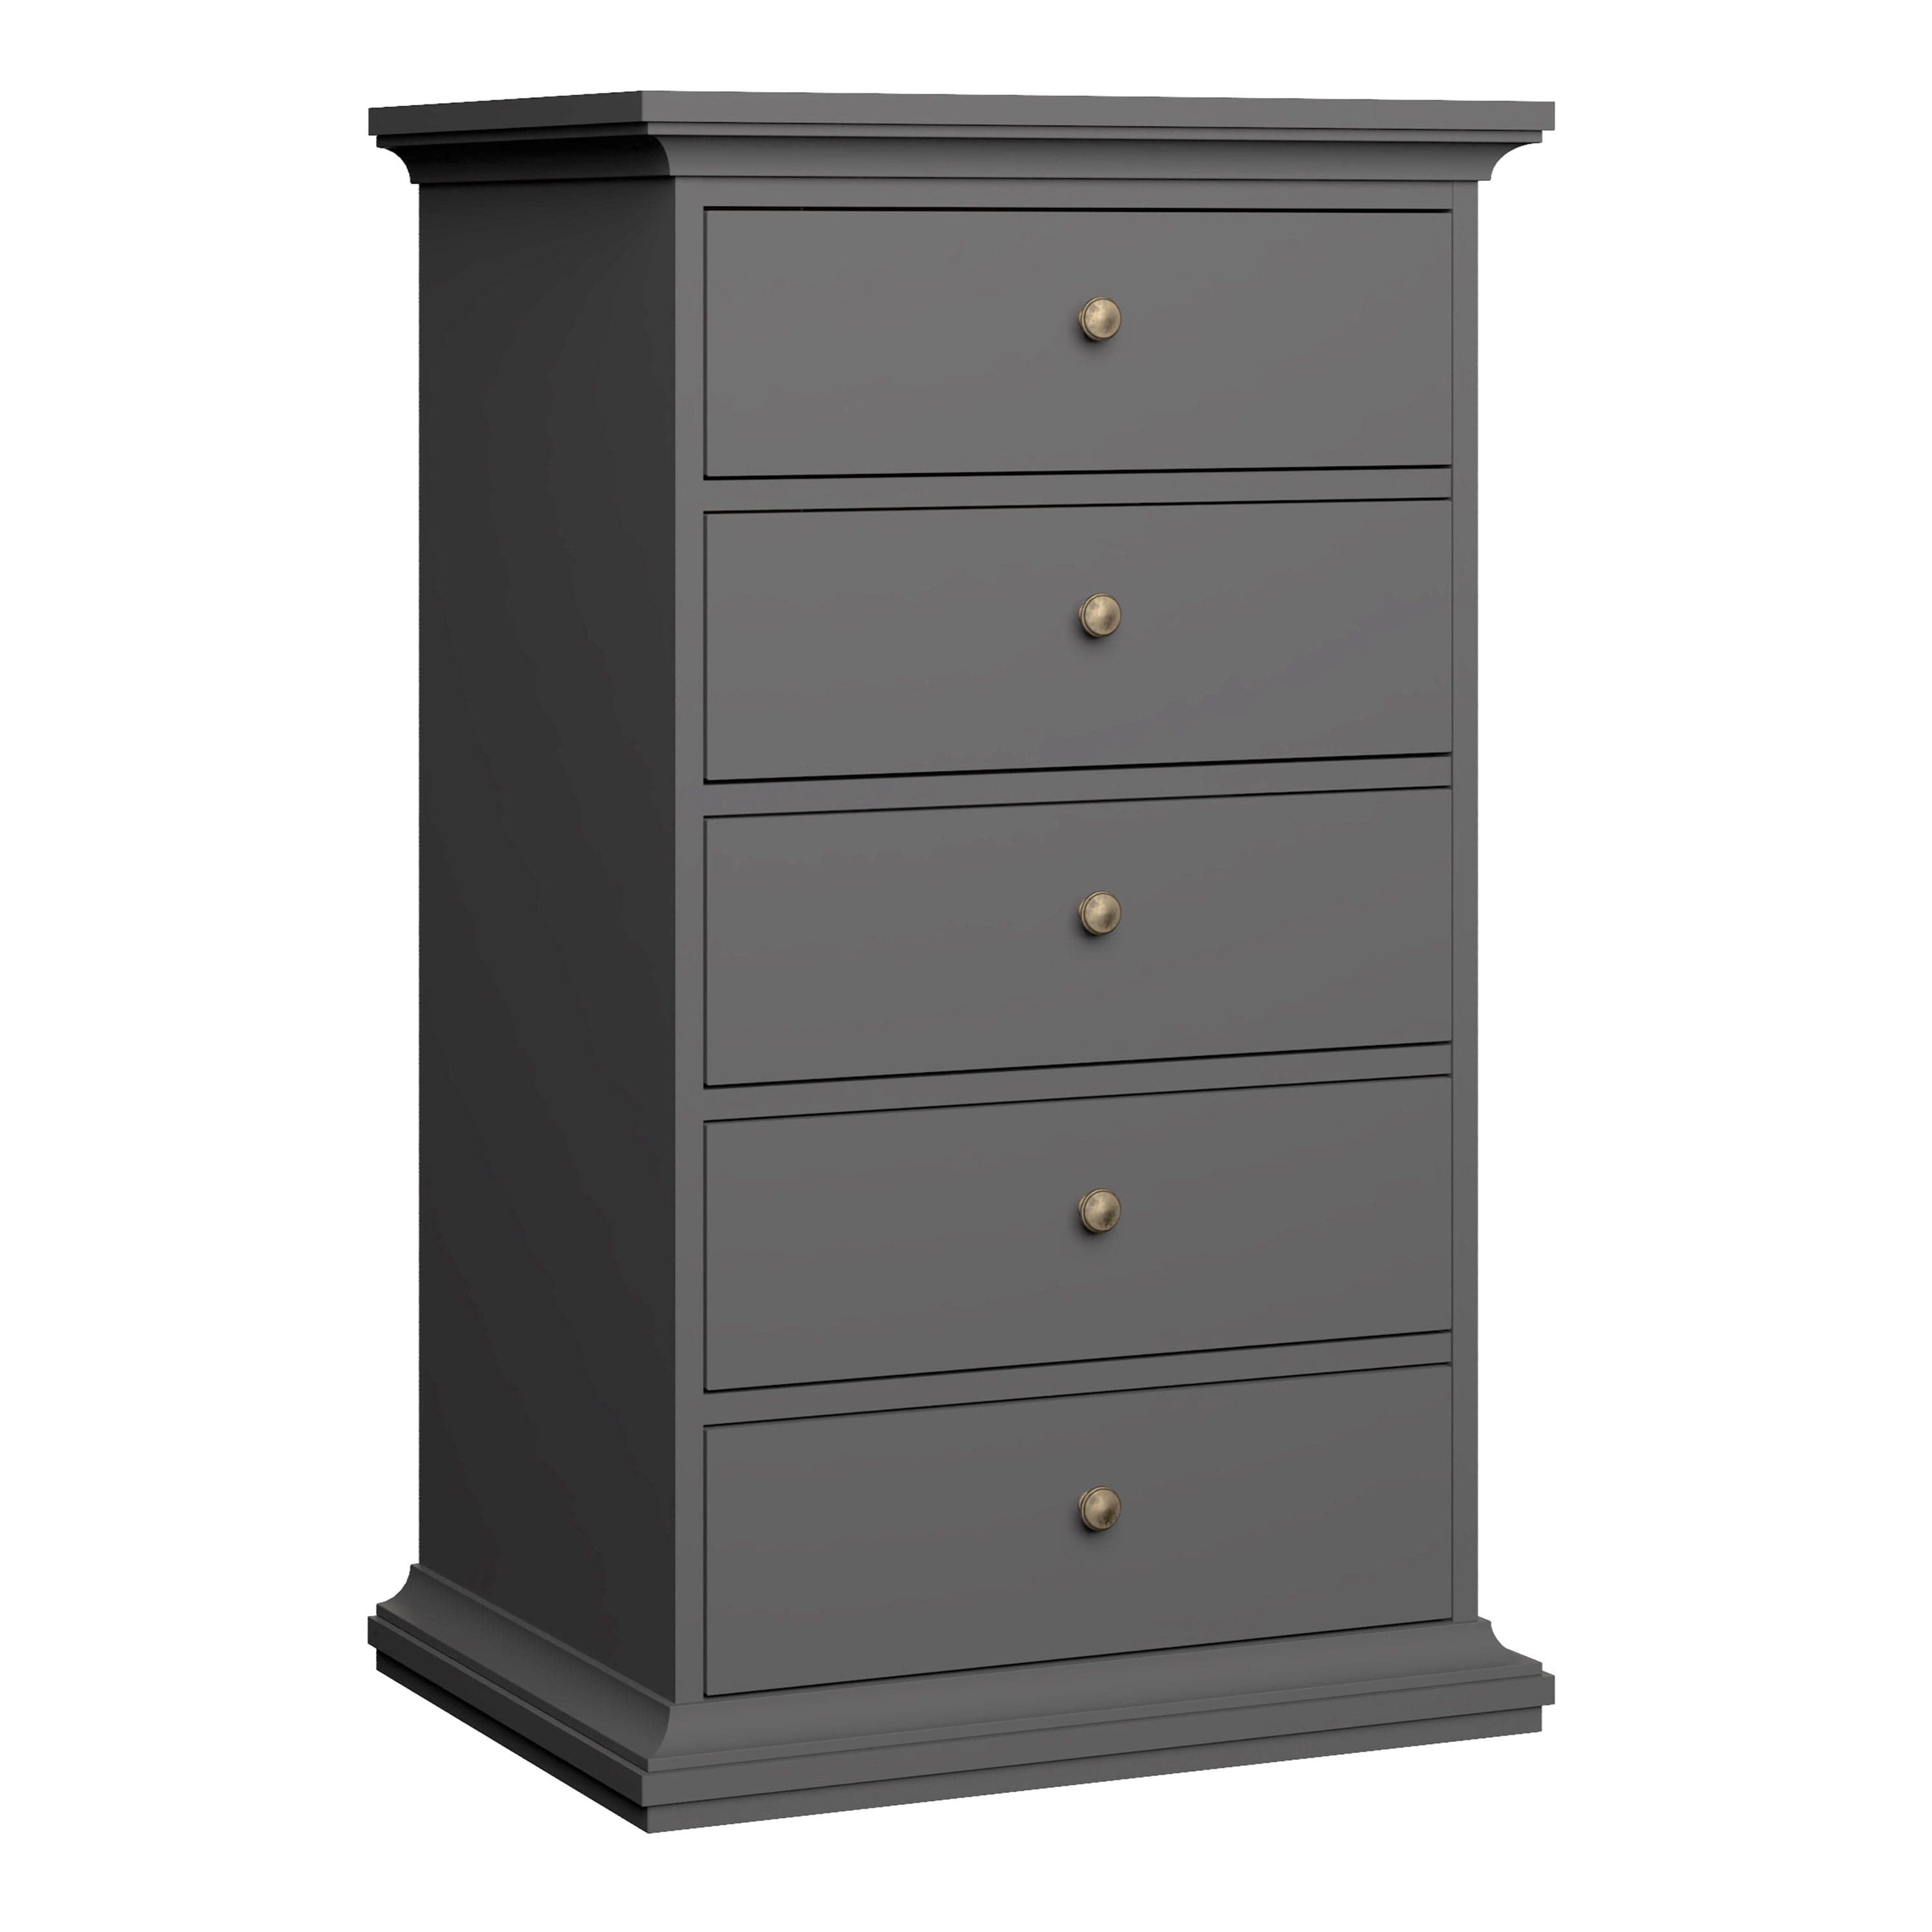 FTG Chest Of Drawers Paris Chest of 5 Drawers in Matt Grey Bed Kings